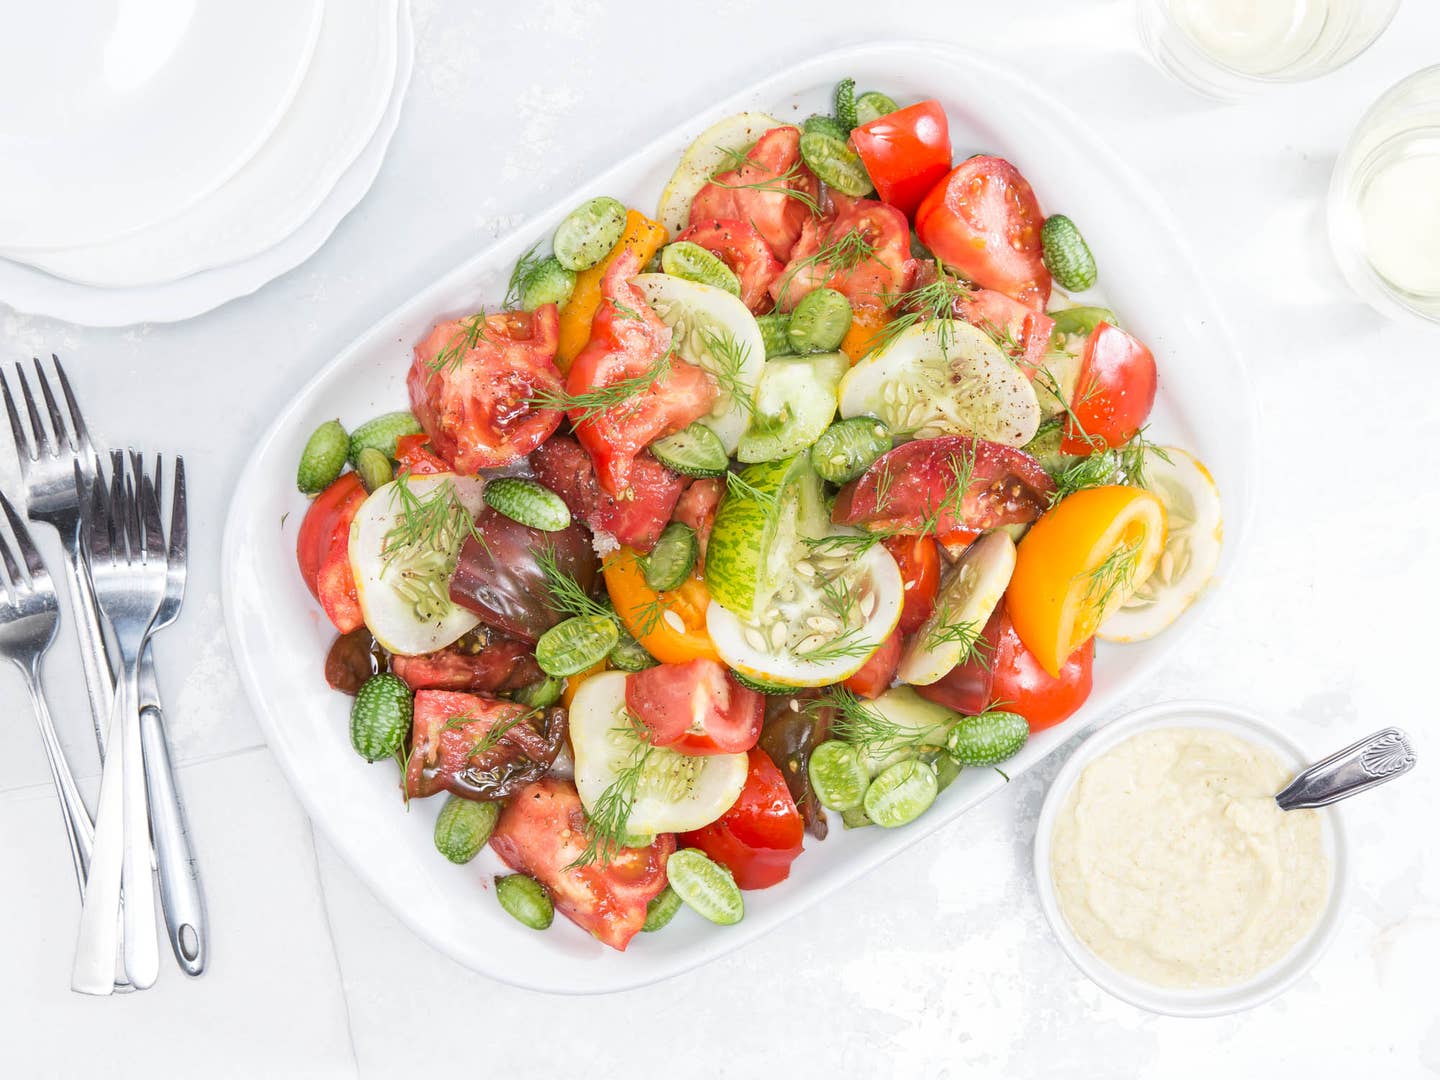 Tomato-Cucumber Salad with Fennel Dressing